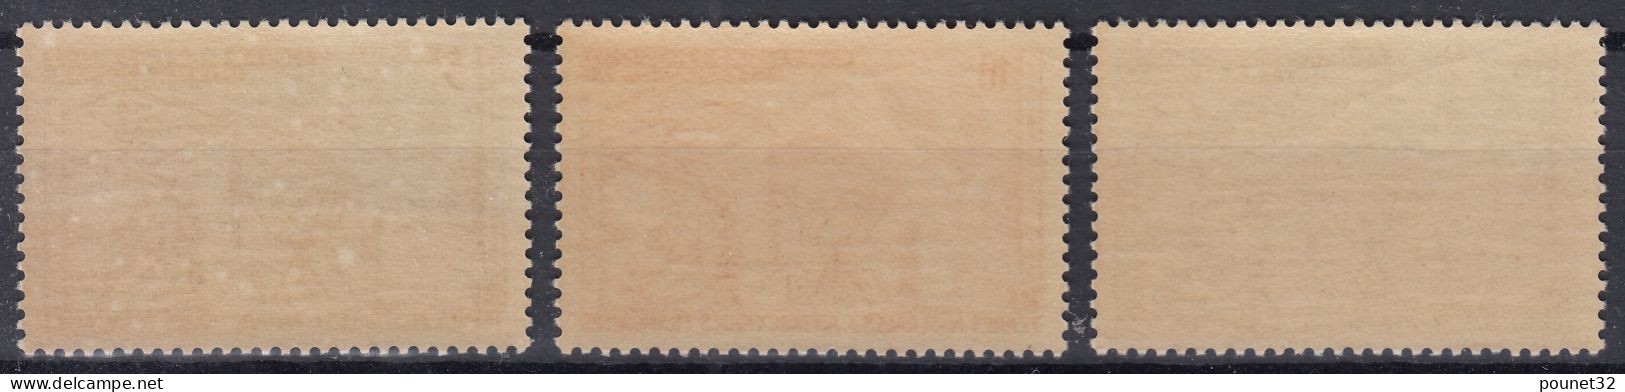 TIMBRE TAAF ANNEE GEOPHYSIQUE INTERNATIONALE N° 8/10 NEUFS ** GOMME SANS CHARNIERE - Unused Stamps